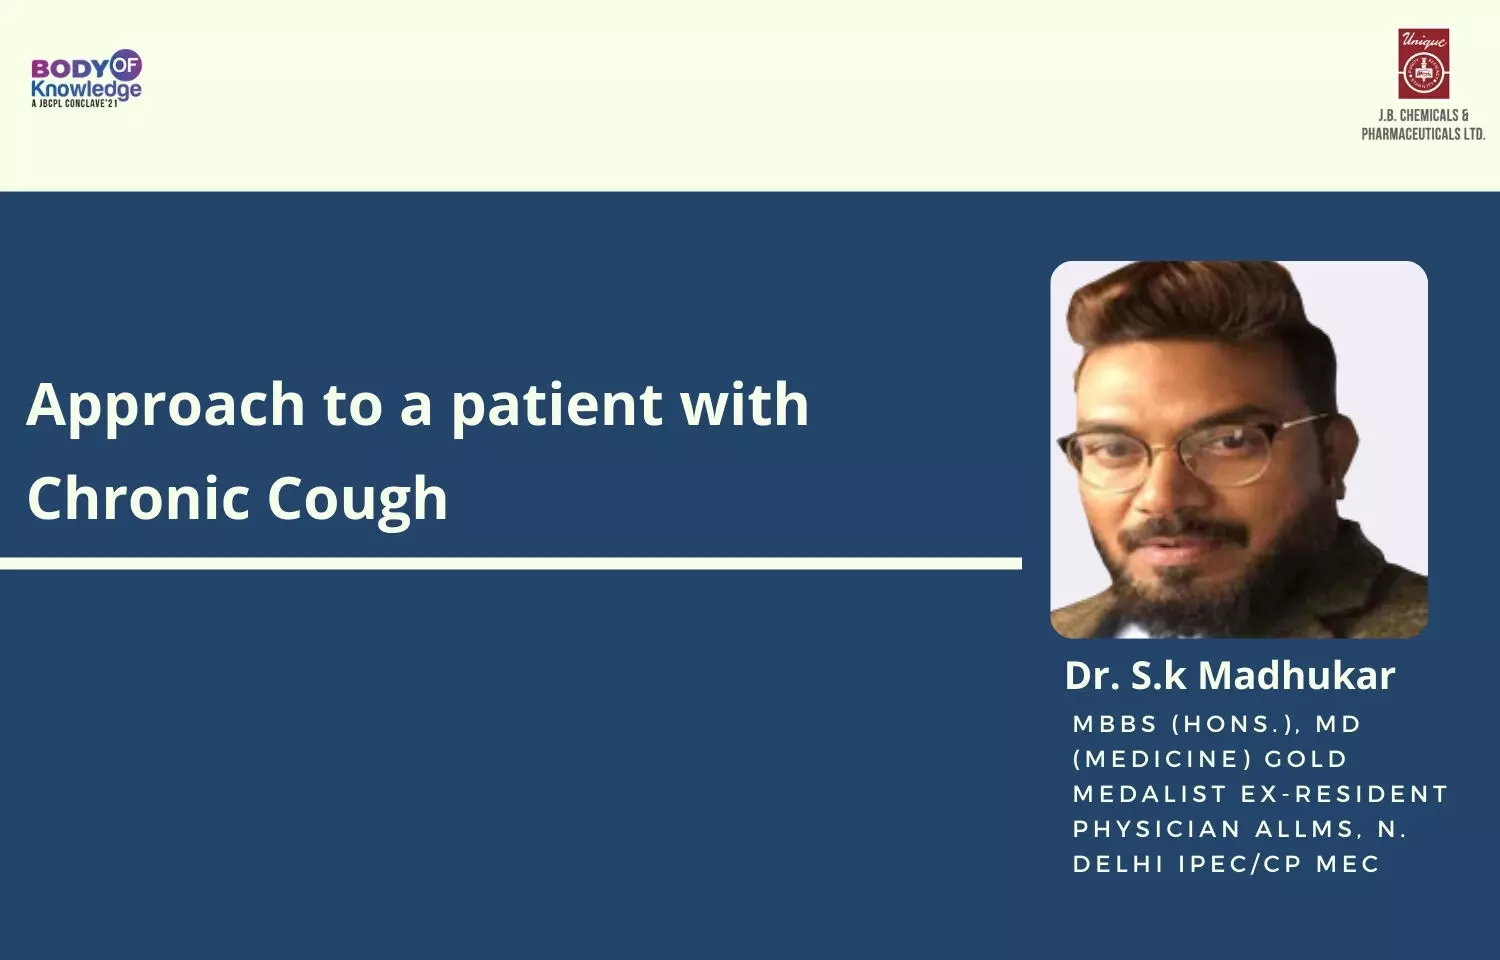 Approach to a patient with Chronic Cough